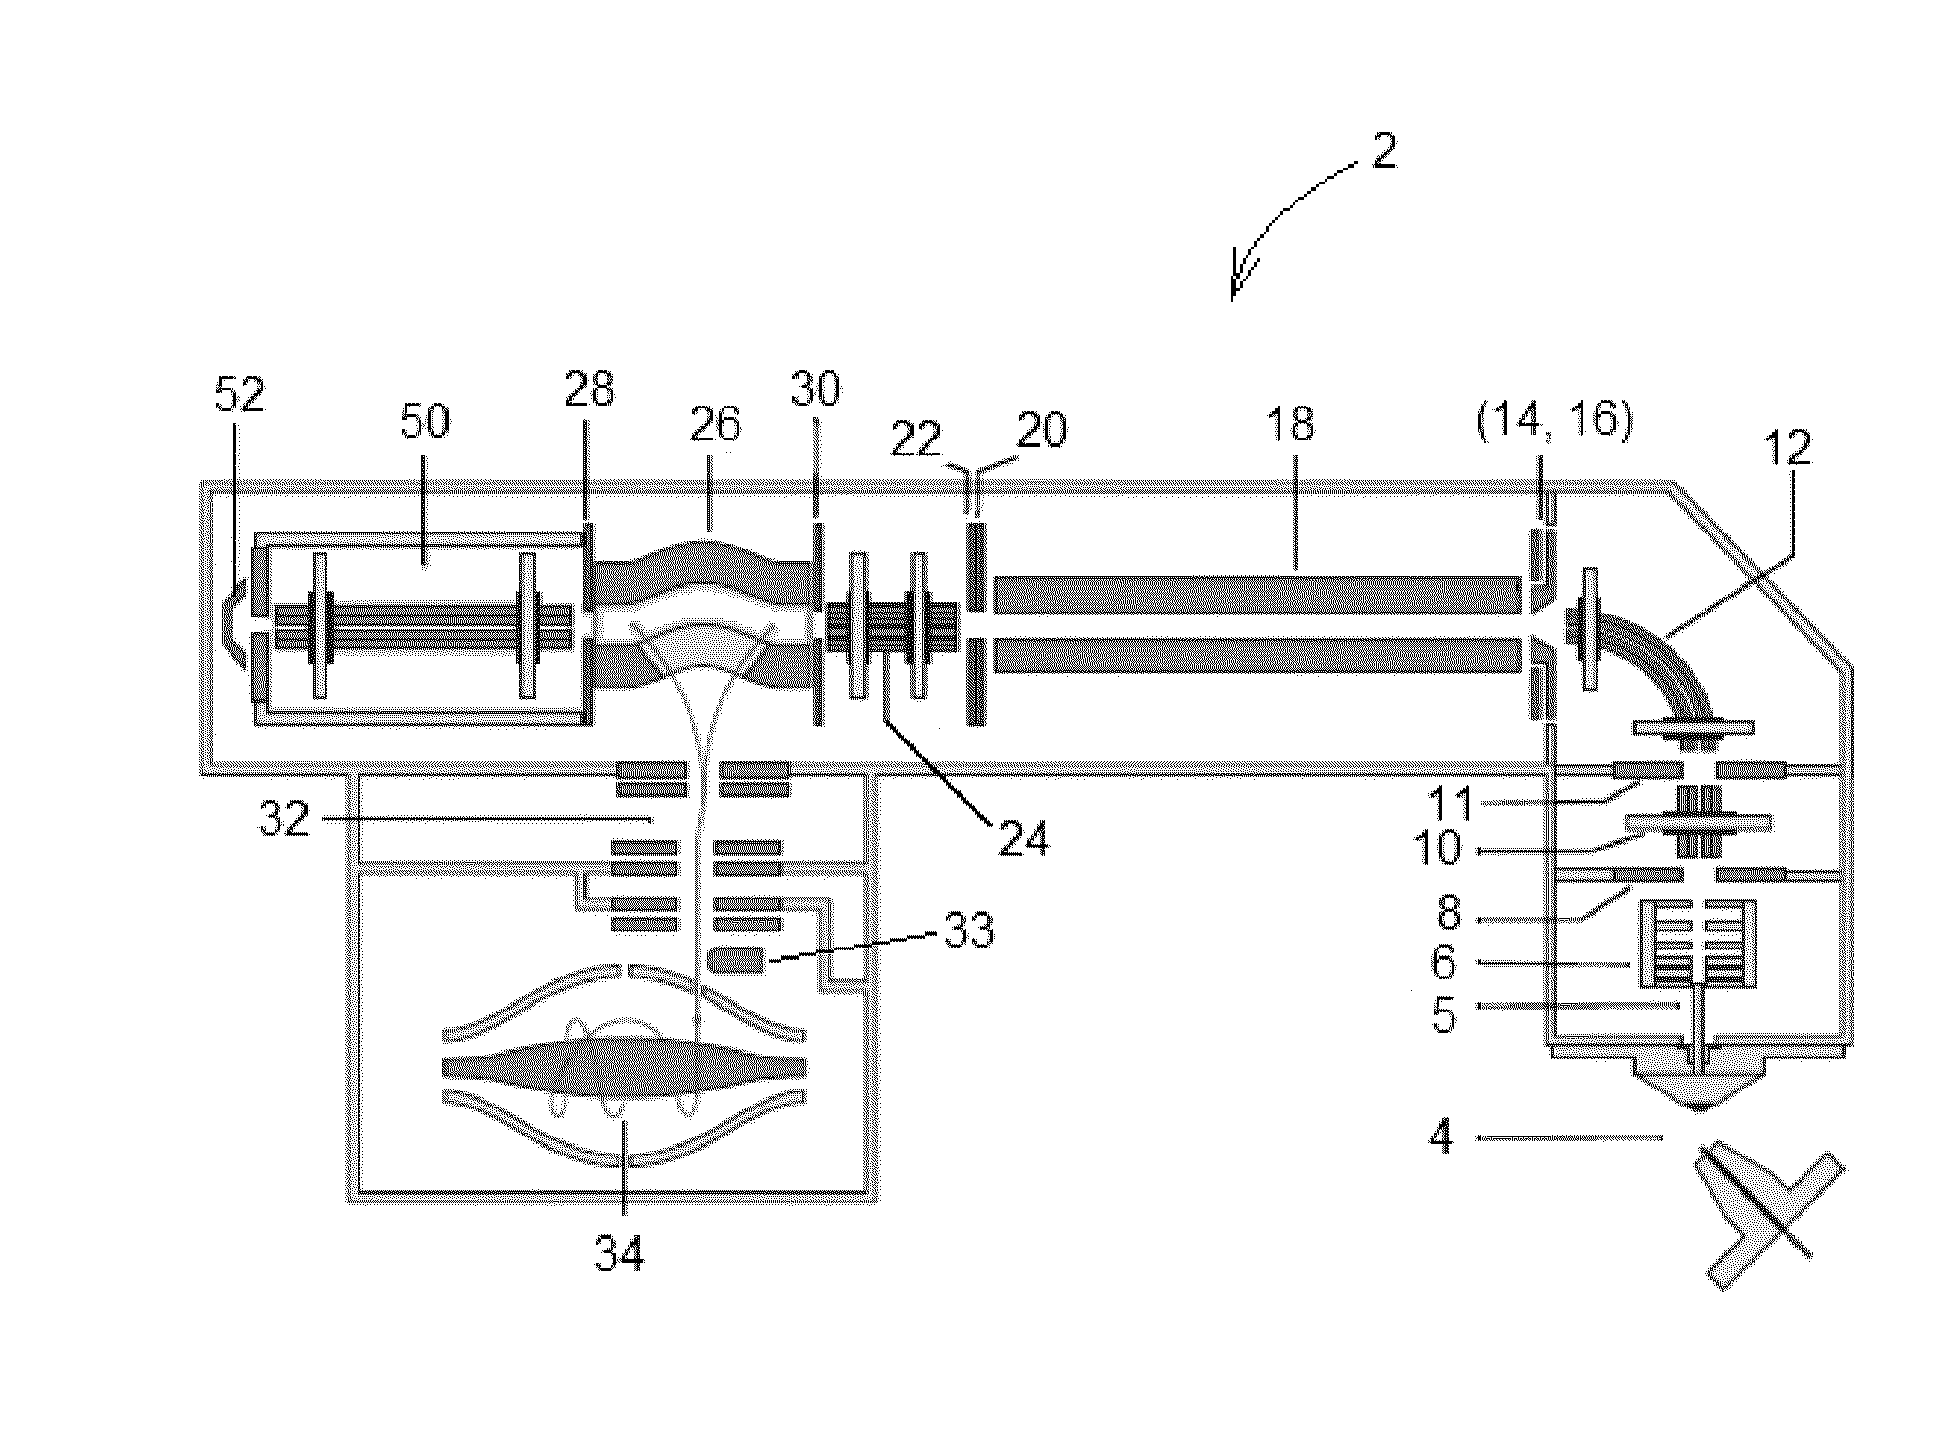 Method of Operating a Mass Filter in Mass Spectrometry